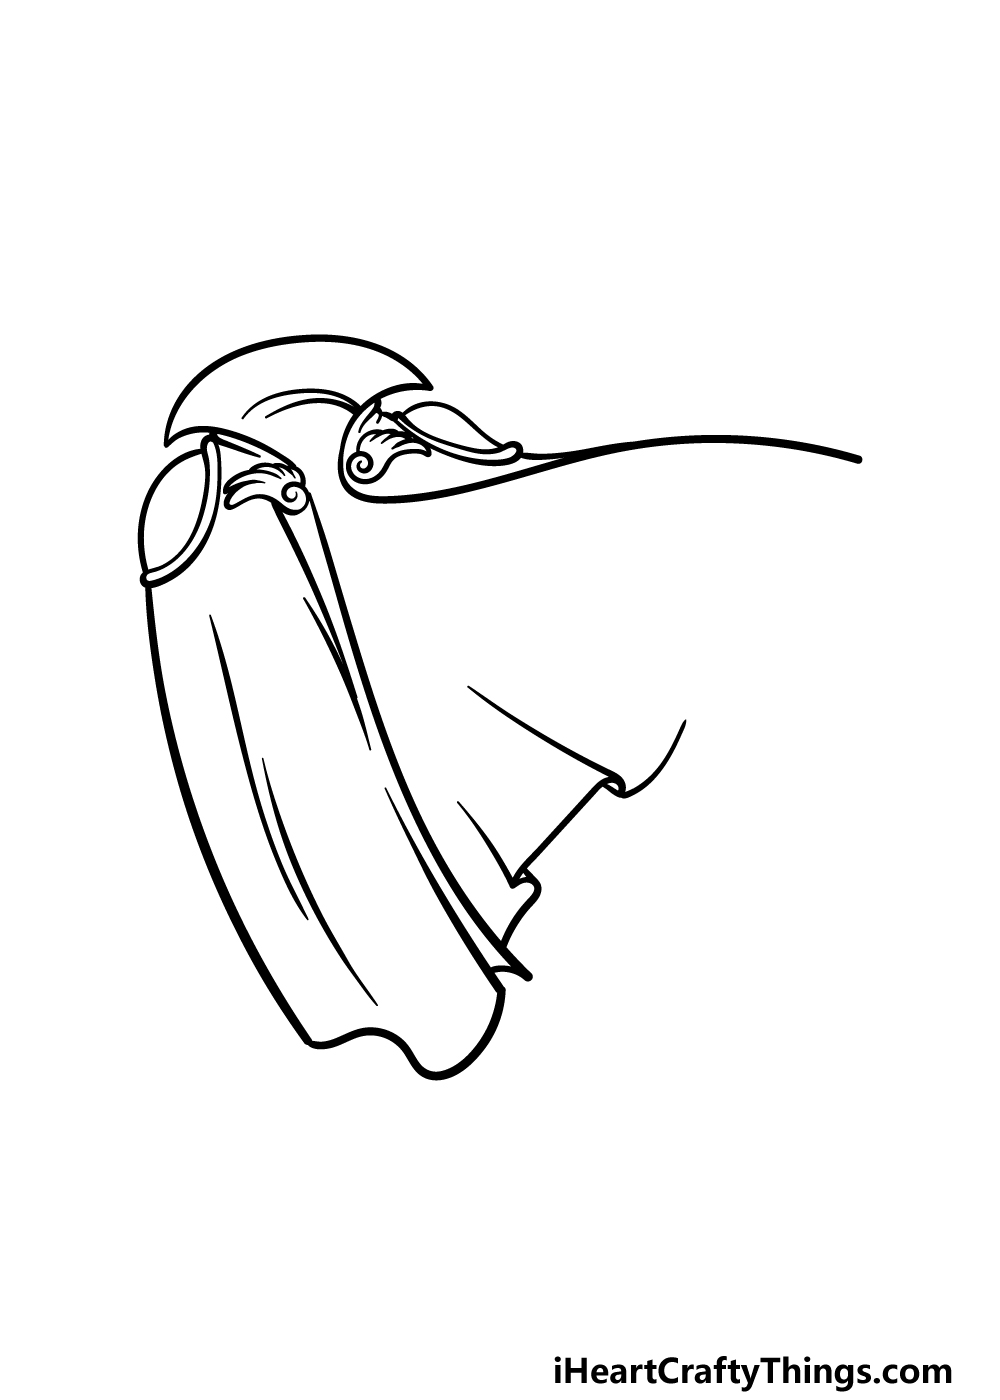 how to draw a Cape step 4